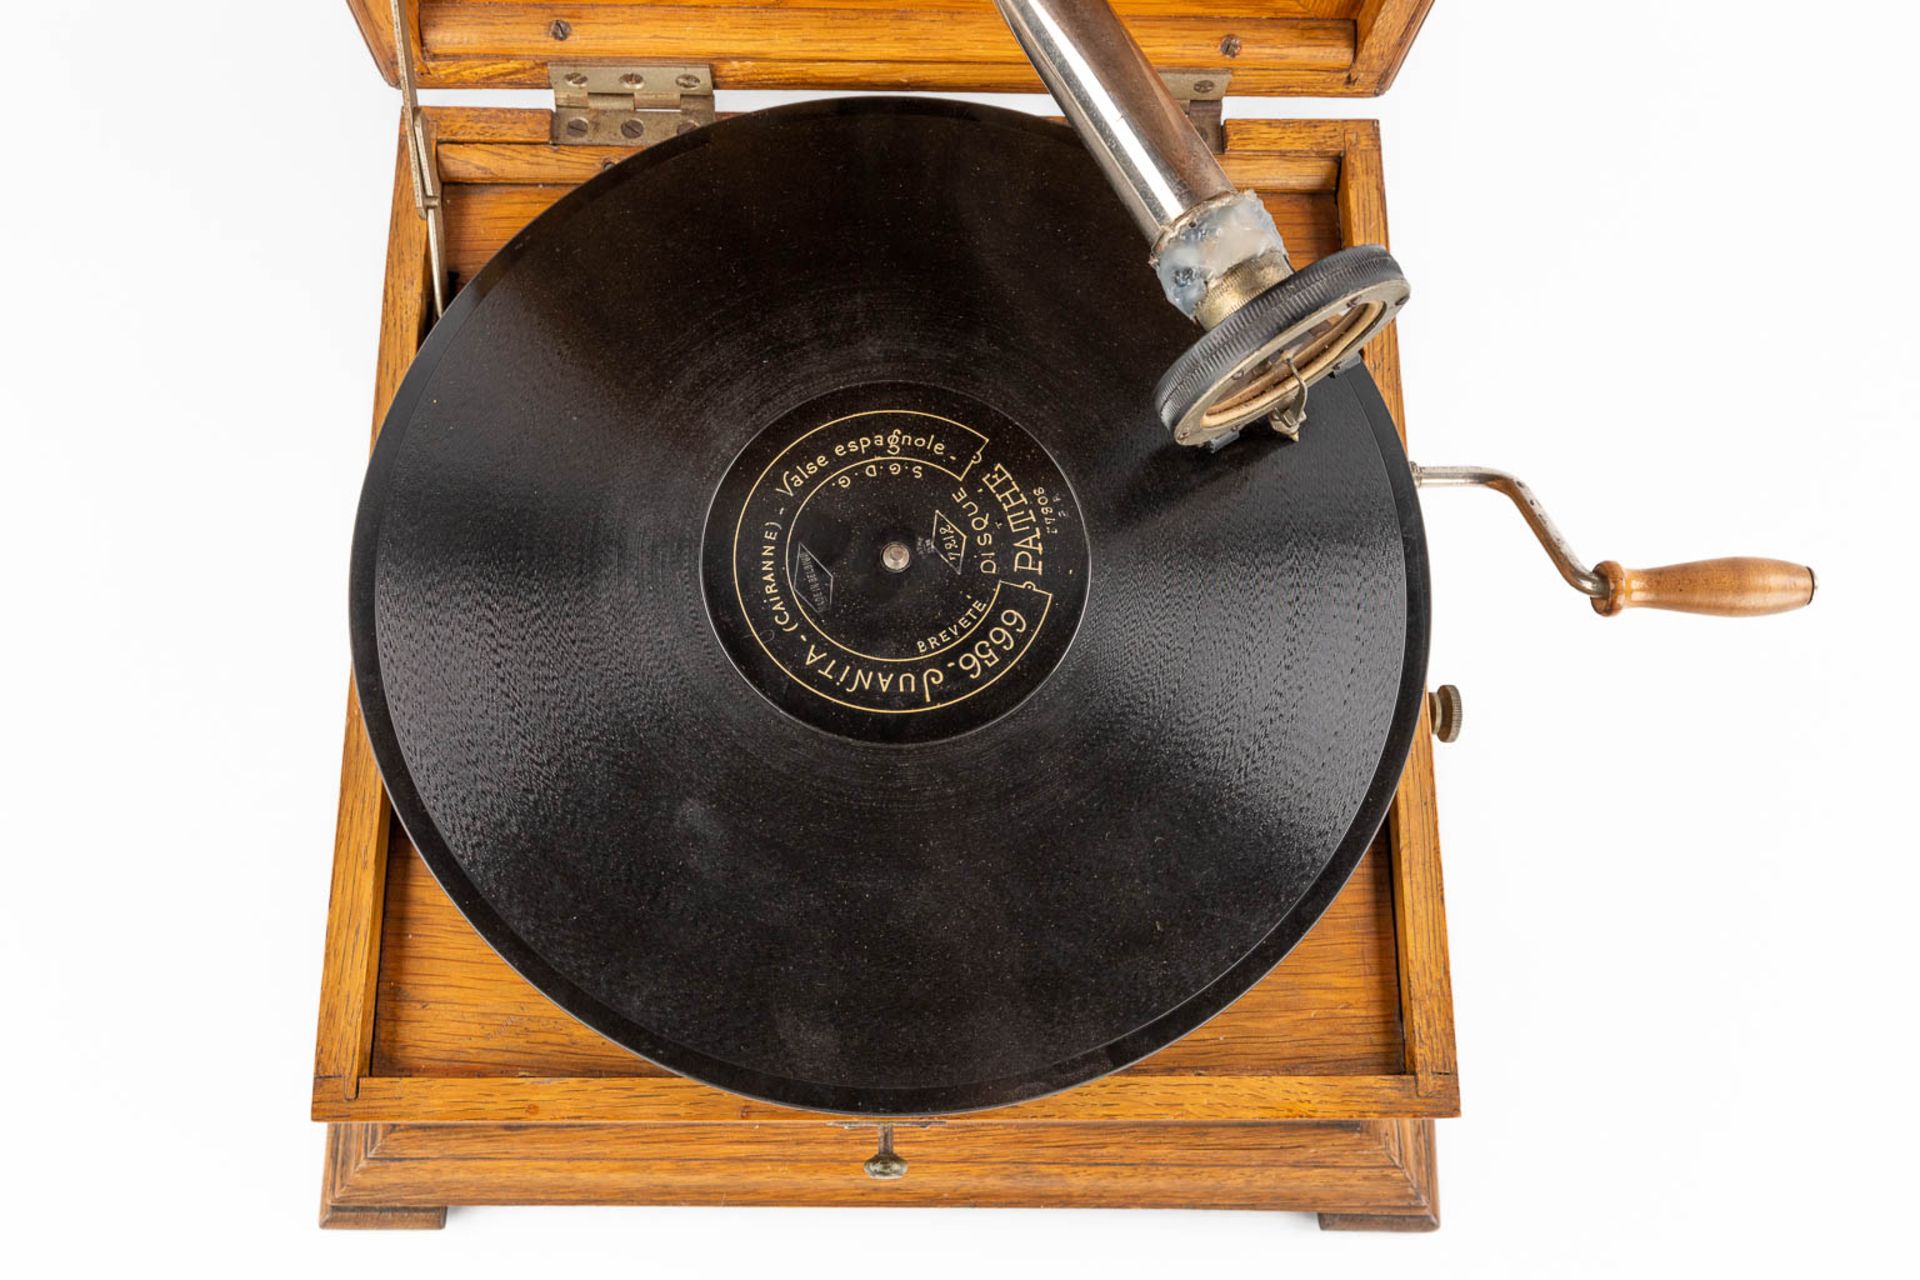 Pathé, a grammophone with bakelite records. The first half of the 20th C. (D:35 x W:35 x H:30 cm) - Image 8 of 16